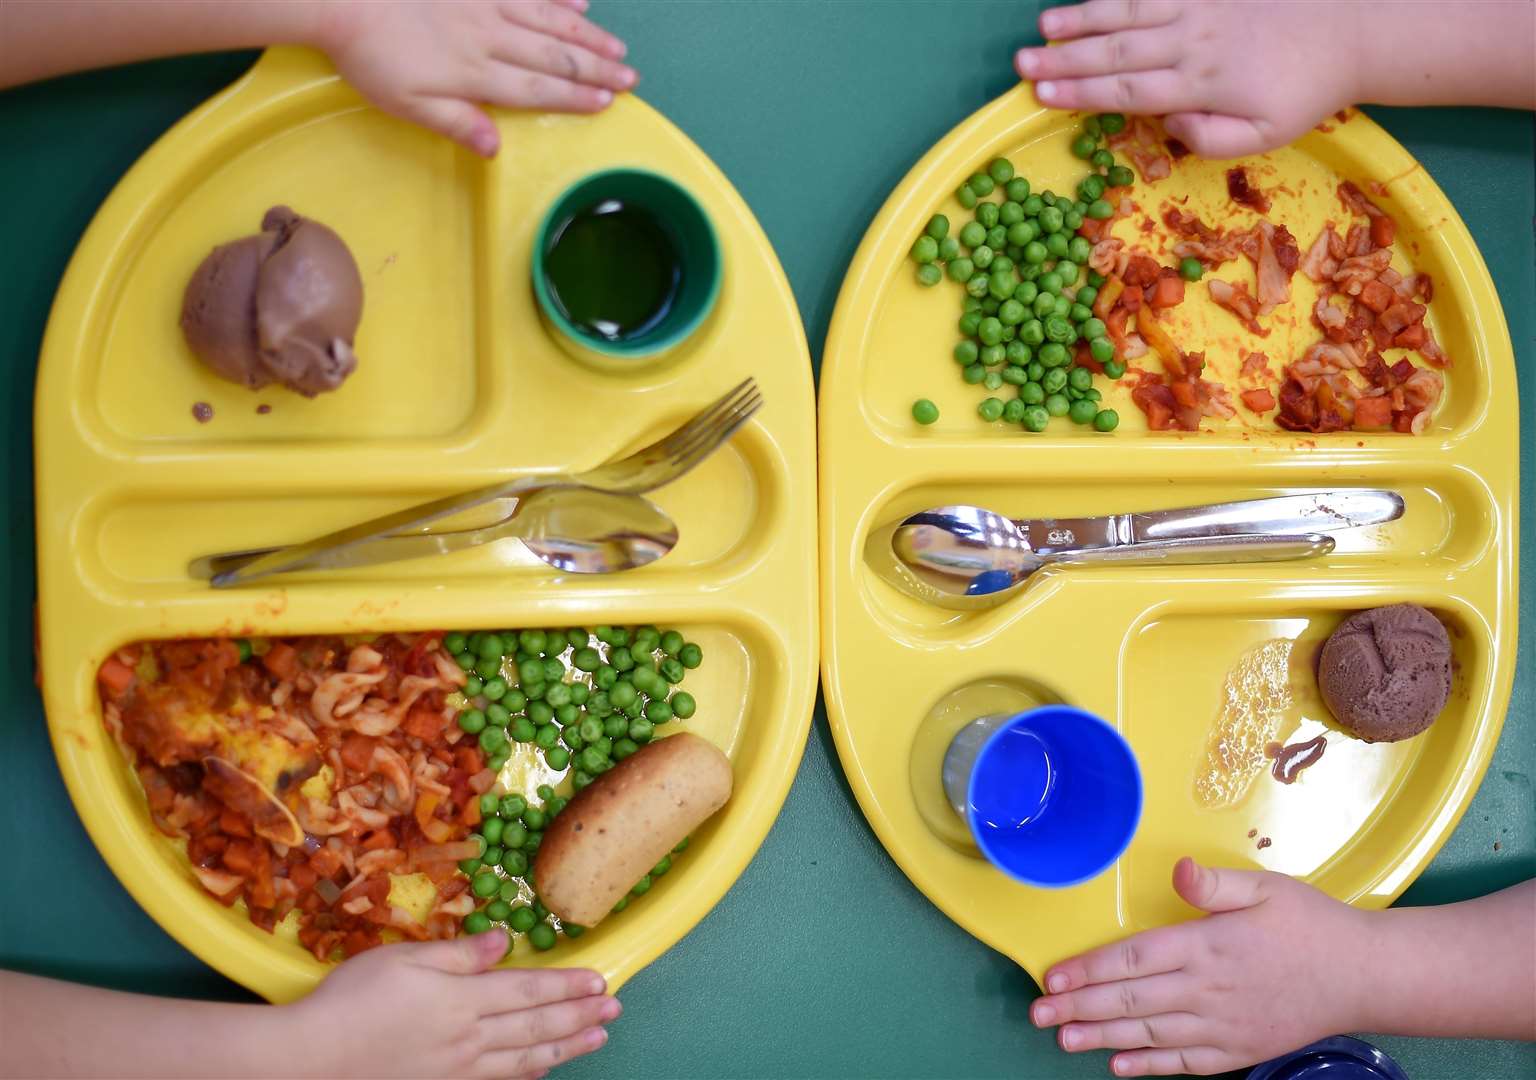 Children in P1-3 get free school meals, but may still qualify once they are older than that.